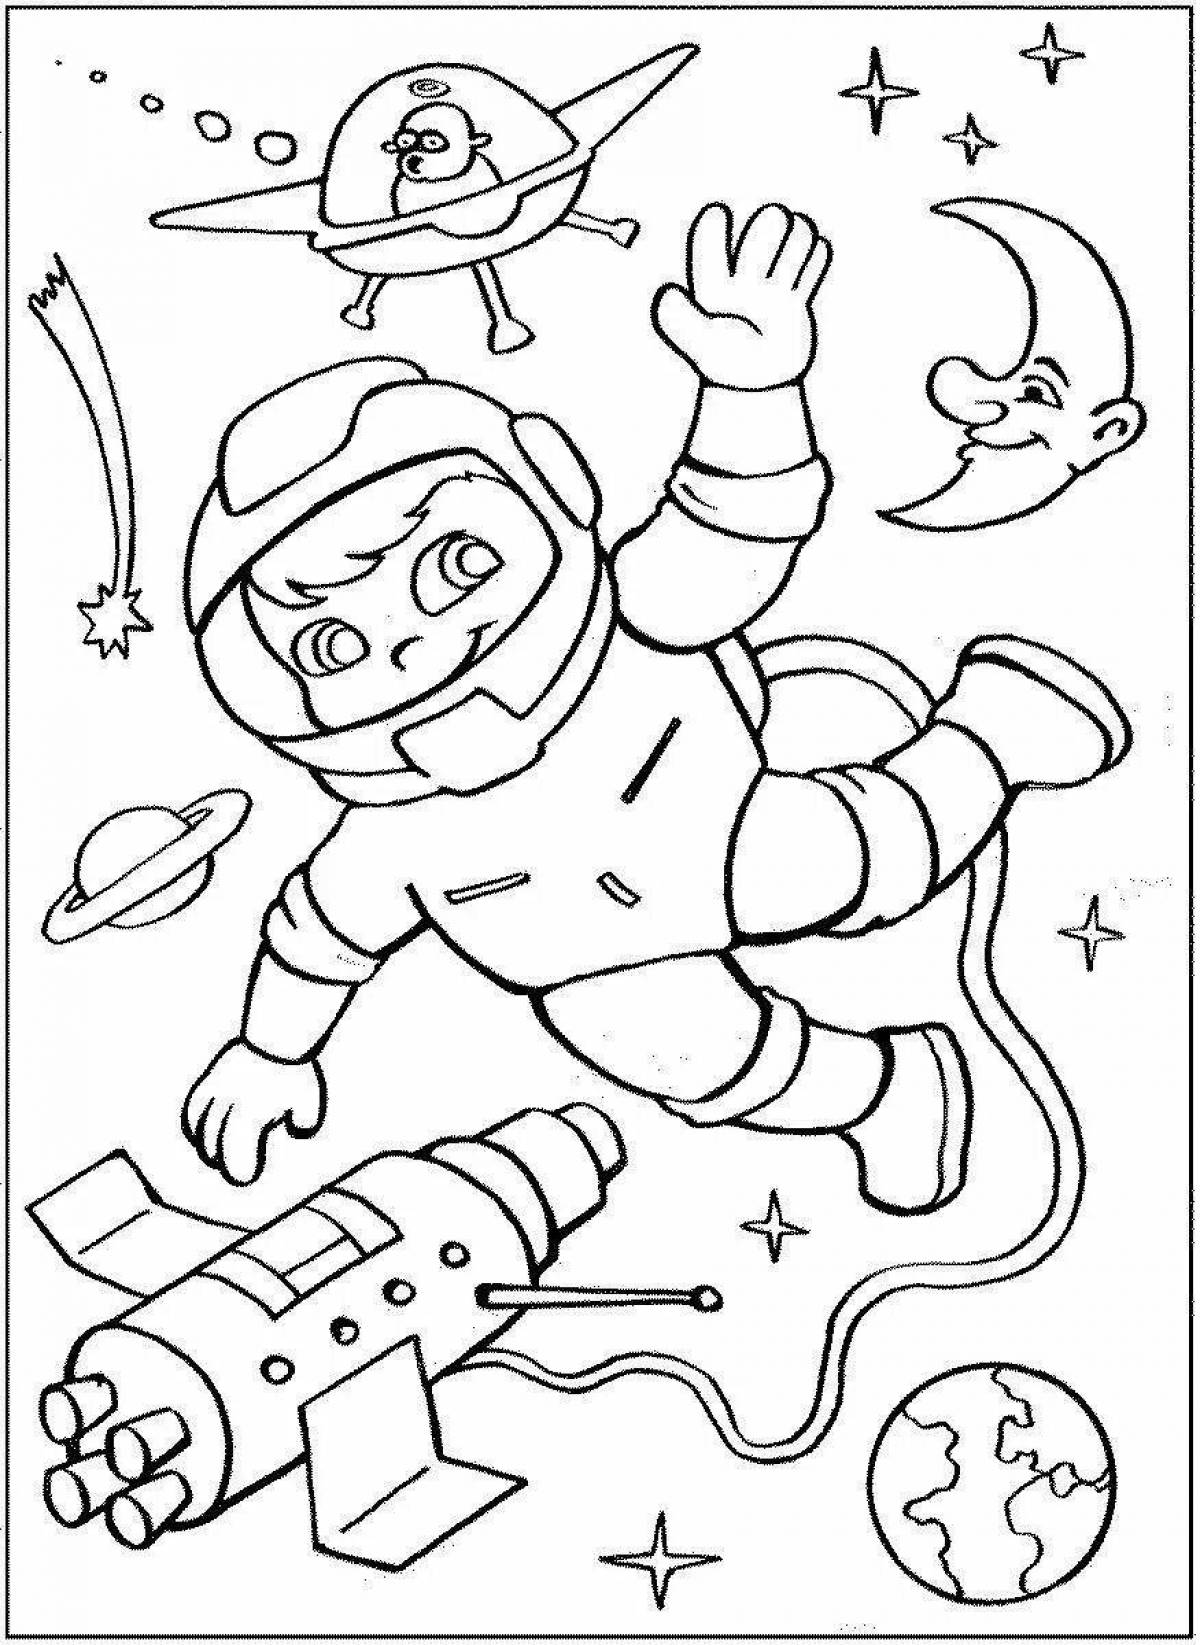 Bright space coloring book for kids 5-6 years old